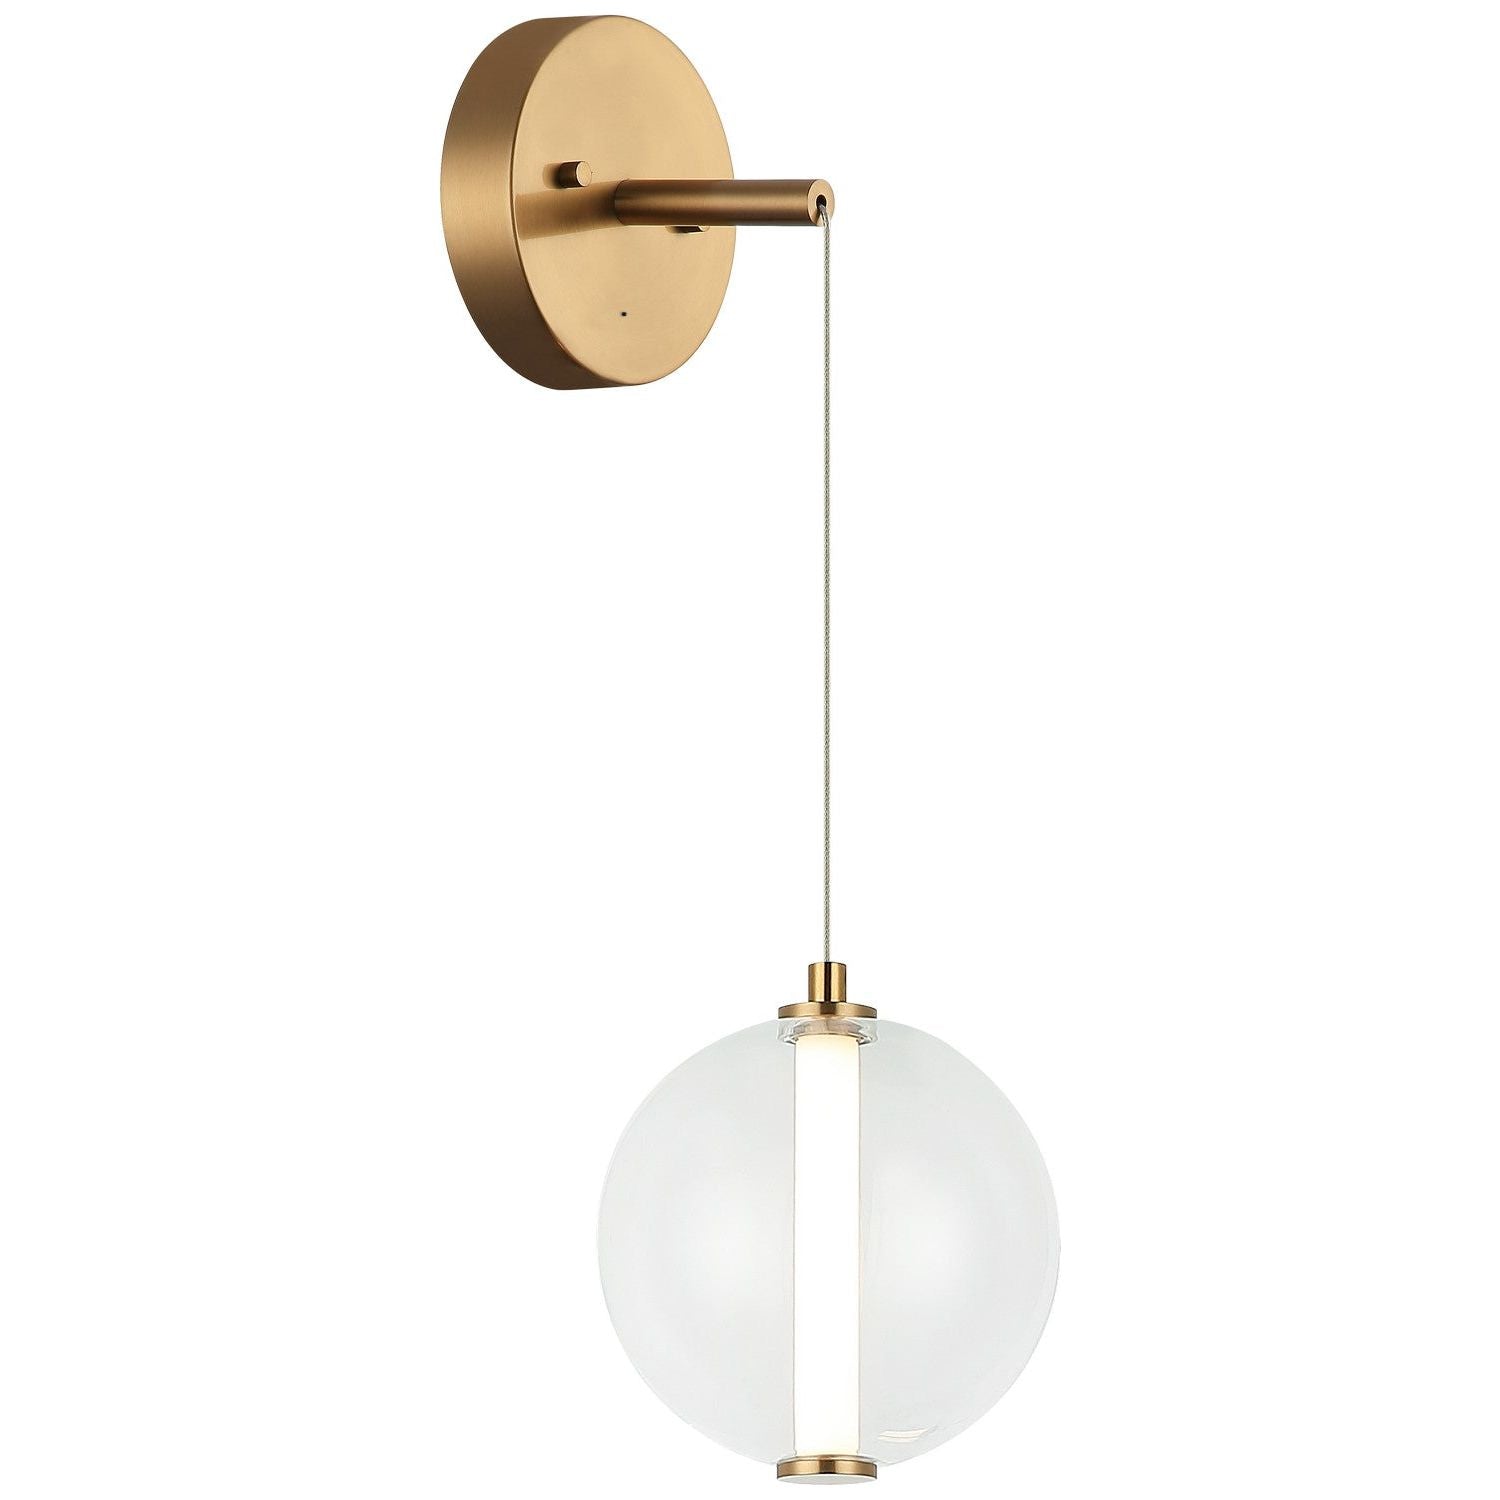 Matteo Canada - W69601AGCL - LED Wall Sconce - Belange - Aged Gold Brass